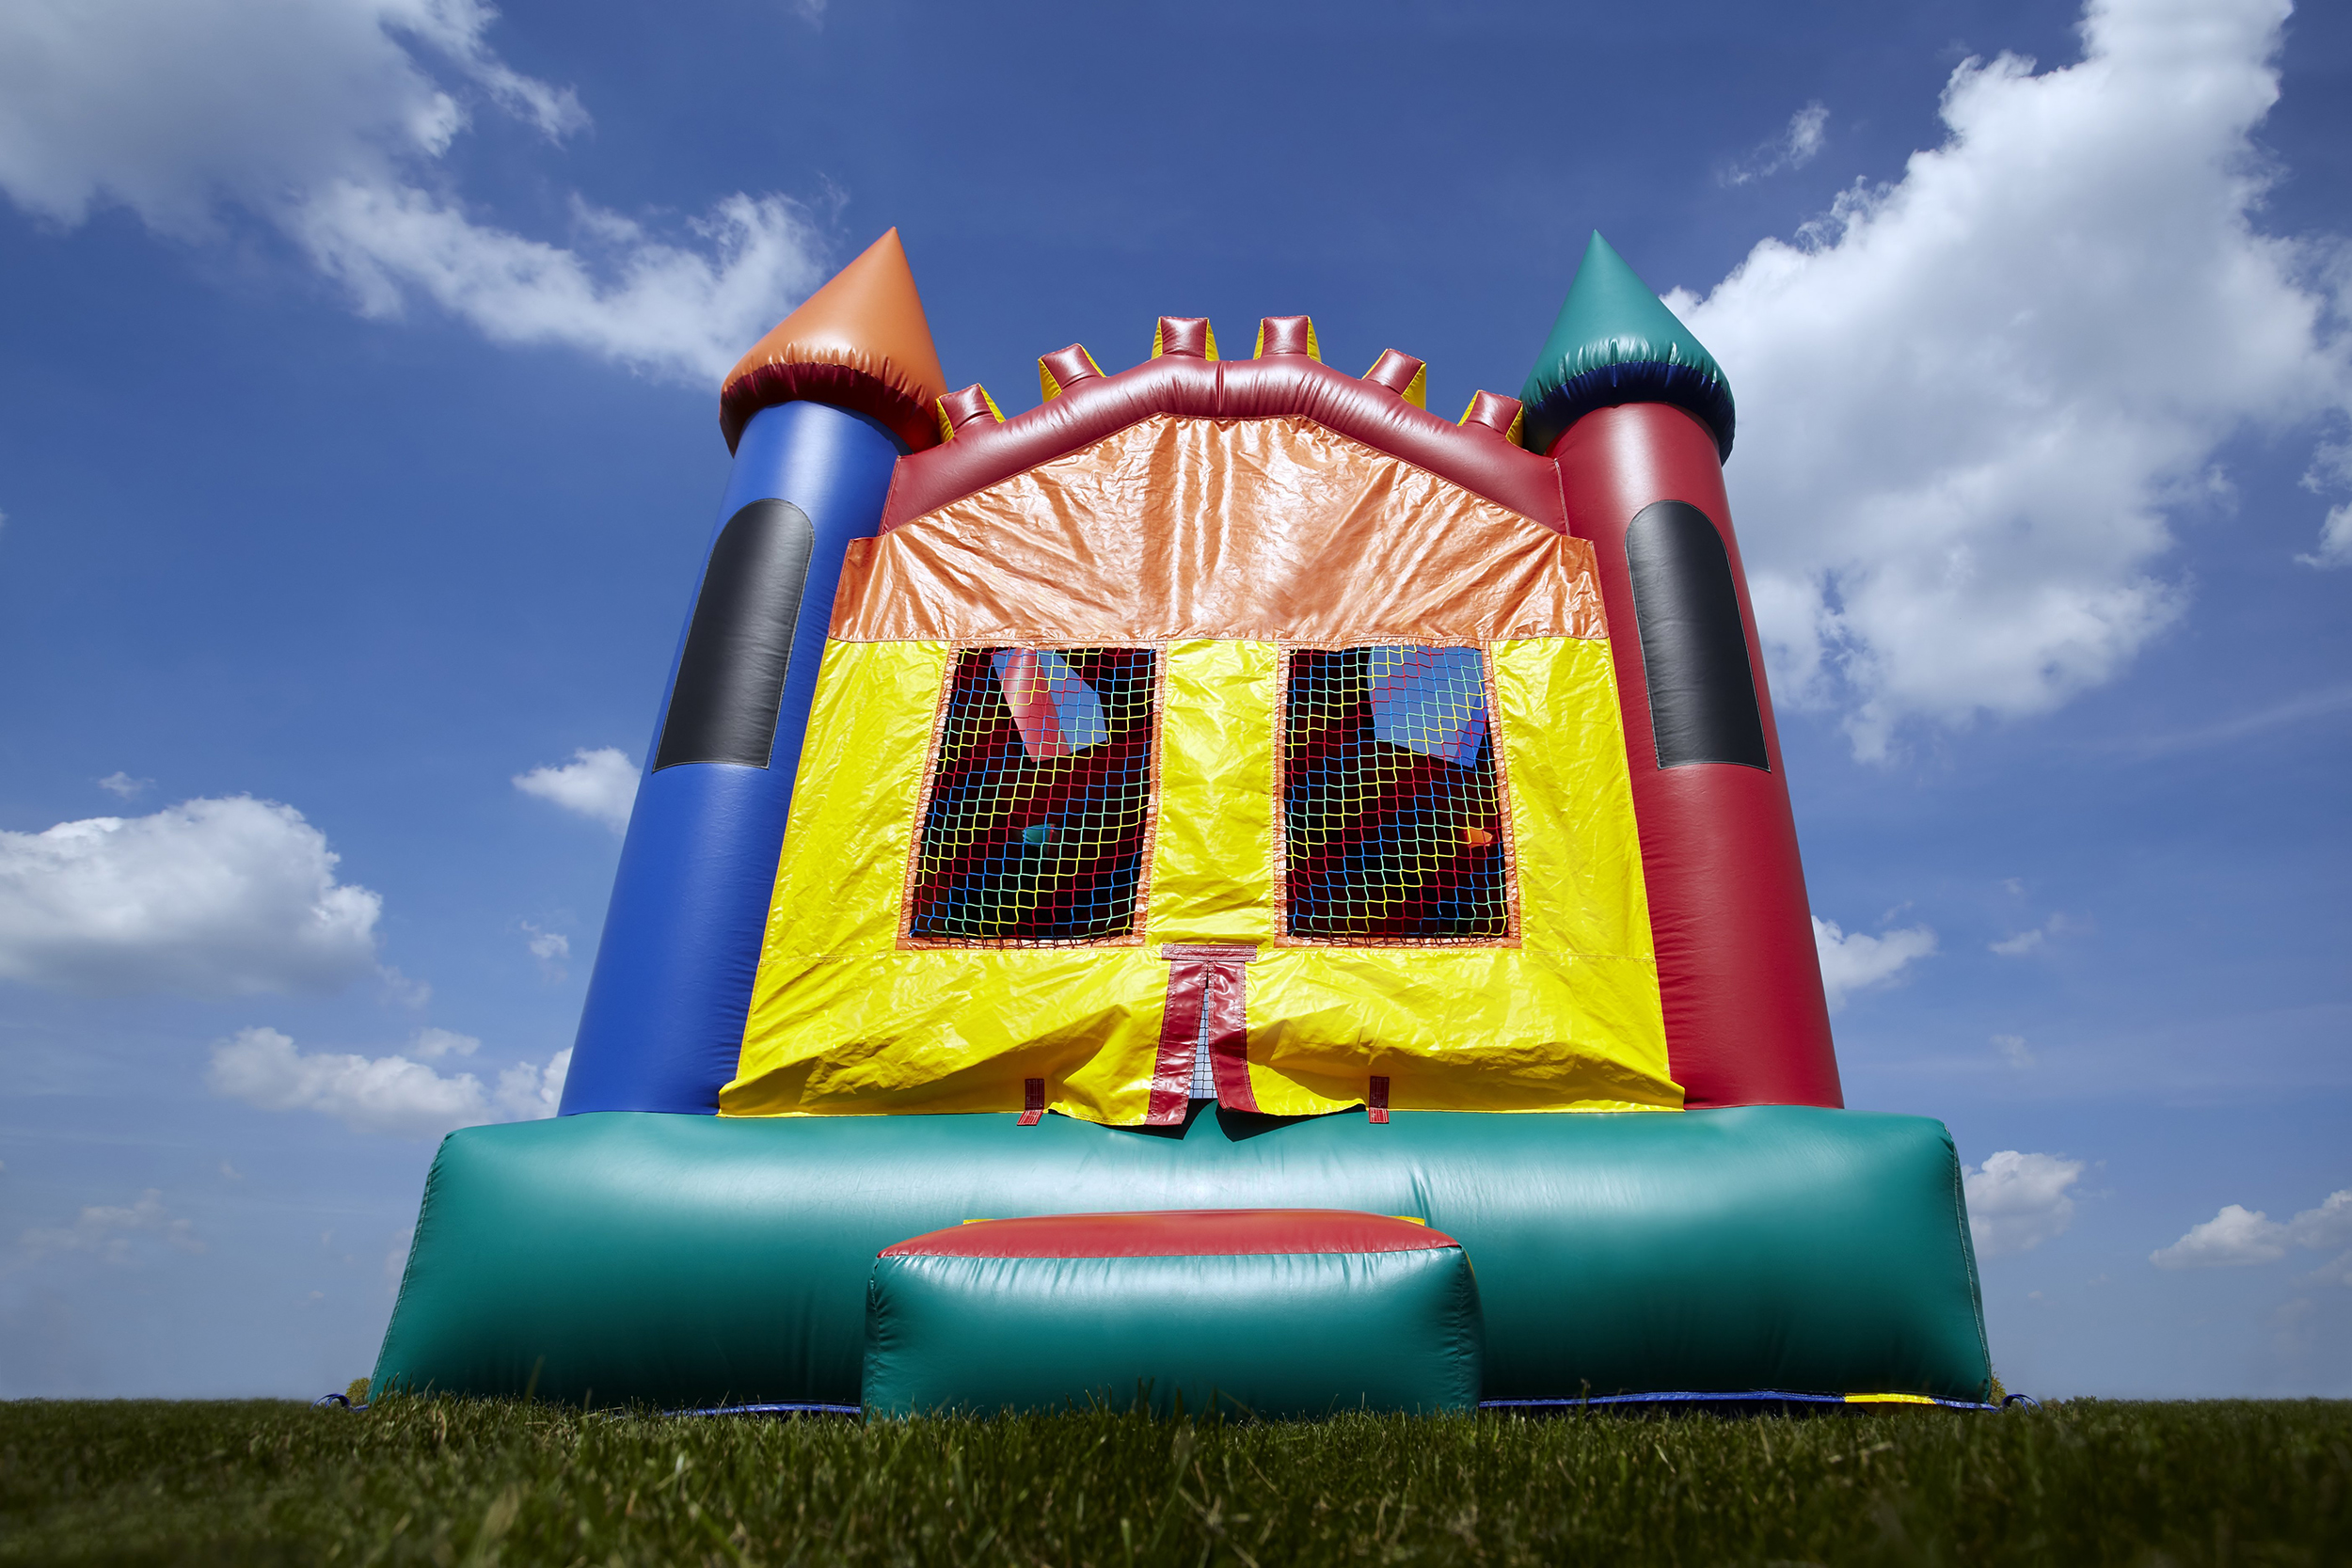 Bounce house safety back in spotlight after boy blown onto ...